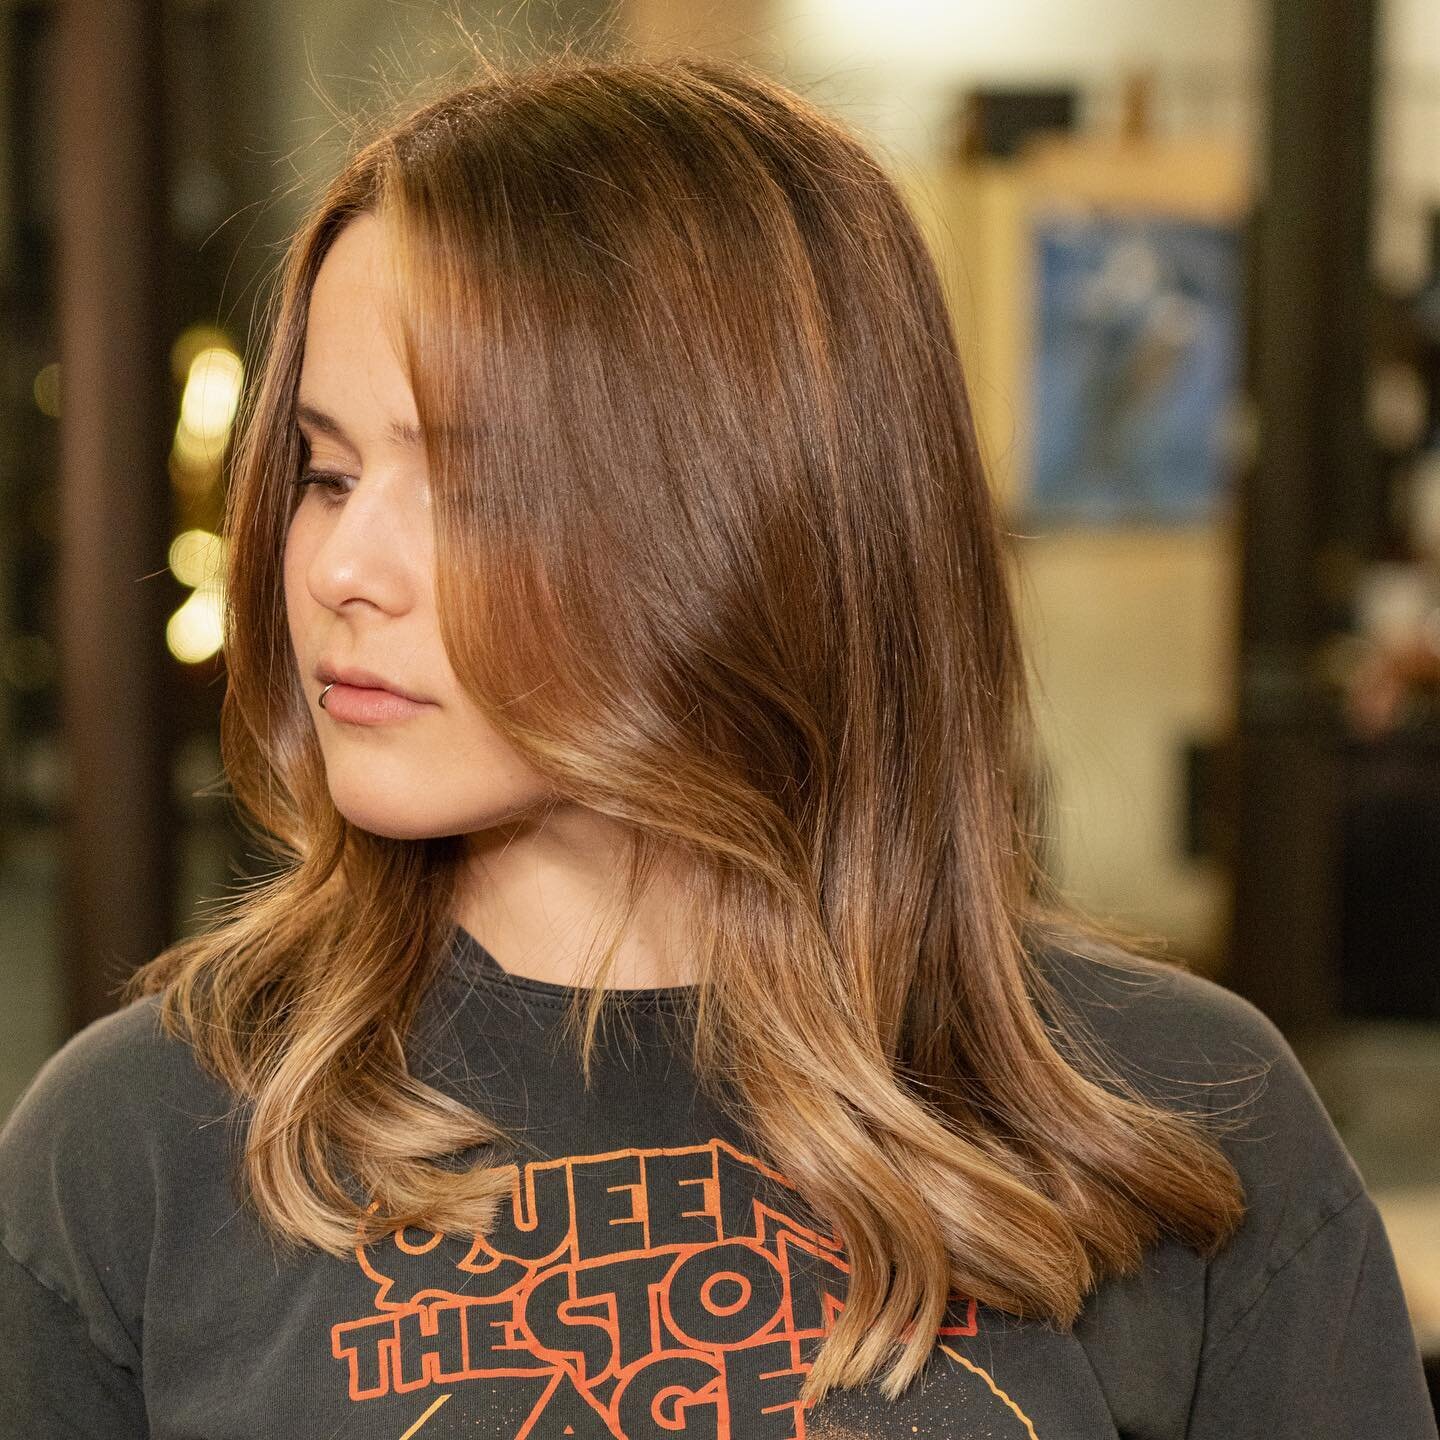 Babylights are an ideal option for those who want to switch up their hair color without making a dramatic change. 👀
These ultra-fine highlights are subtle and natural-looking, requiring little maintenance over time. Plus, this coloring technique is 